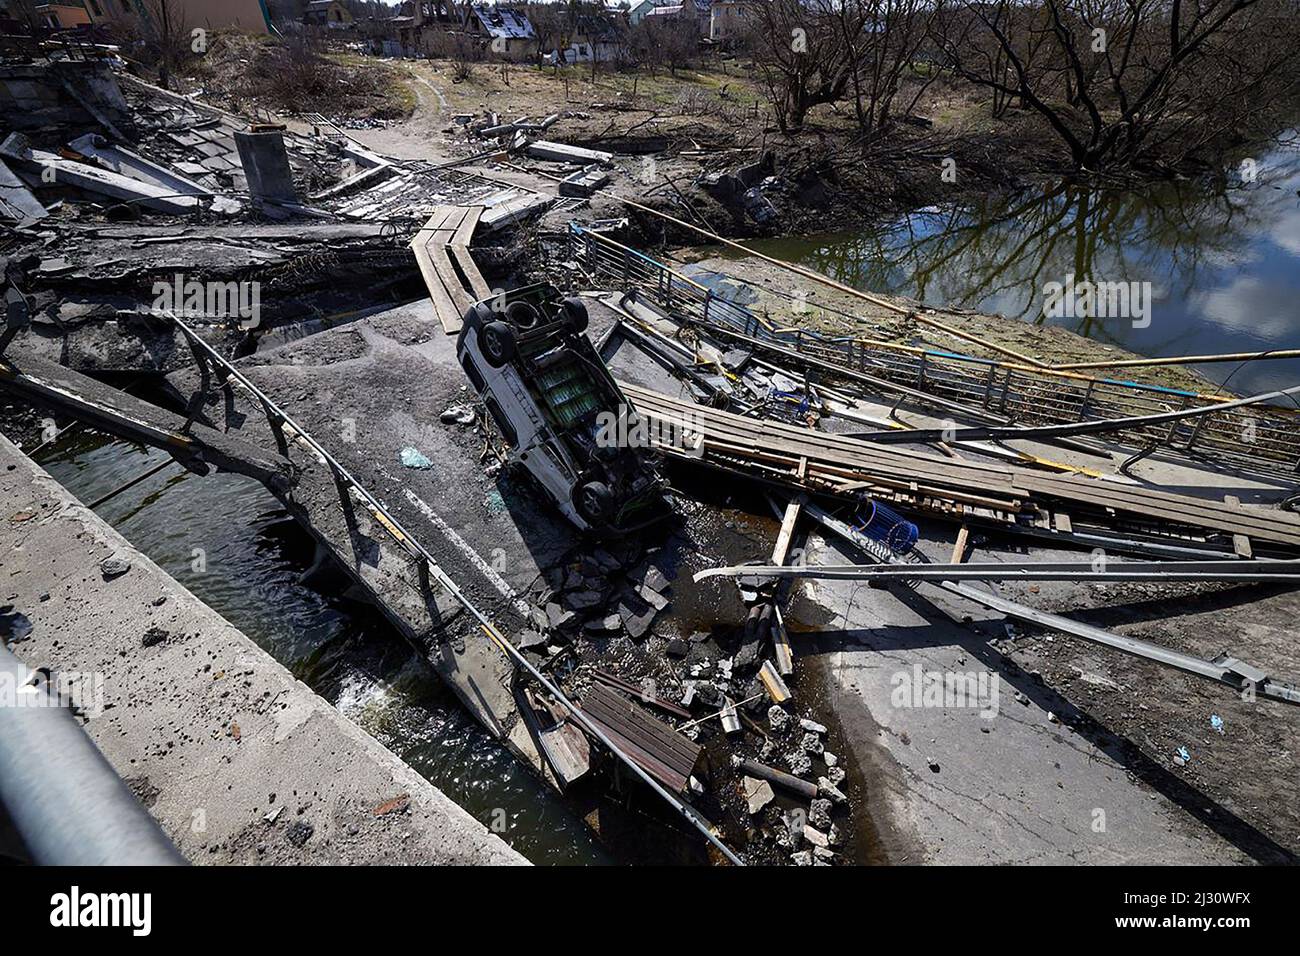 Ukraine's President Volodymyr Zelenskiy stands on a destroyed bridge in the town of Irpin in Ukrainian, on MondayApril 4, 2022. Ukraine's President Volodymyr Zelensky said on April 3, 2022 the Russian leadership was responsible for civilian killings in Bucha, outside Kyiv, where bodies were found lying in the street after the town was retaken by the Ukrainian army. The Russian Defense Ministry rejected accusations the same day argueing that Russian forces left Bucha on March 30 while evidence of killings was presented four days later. Photo by Ukrainian Presidental Office/ UPI Stock Photo